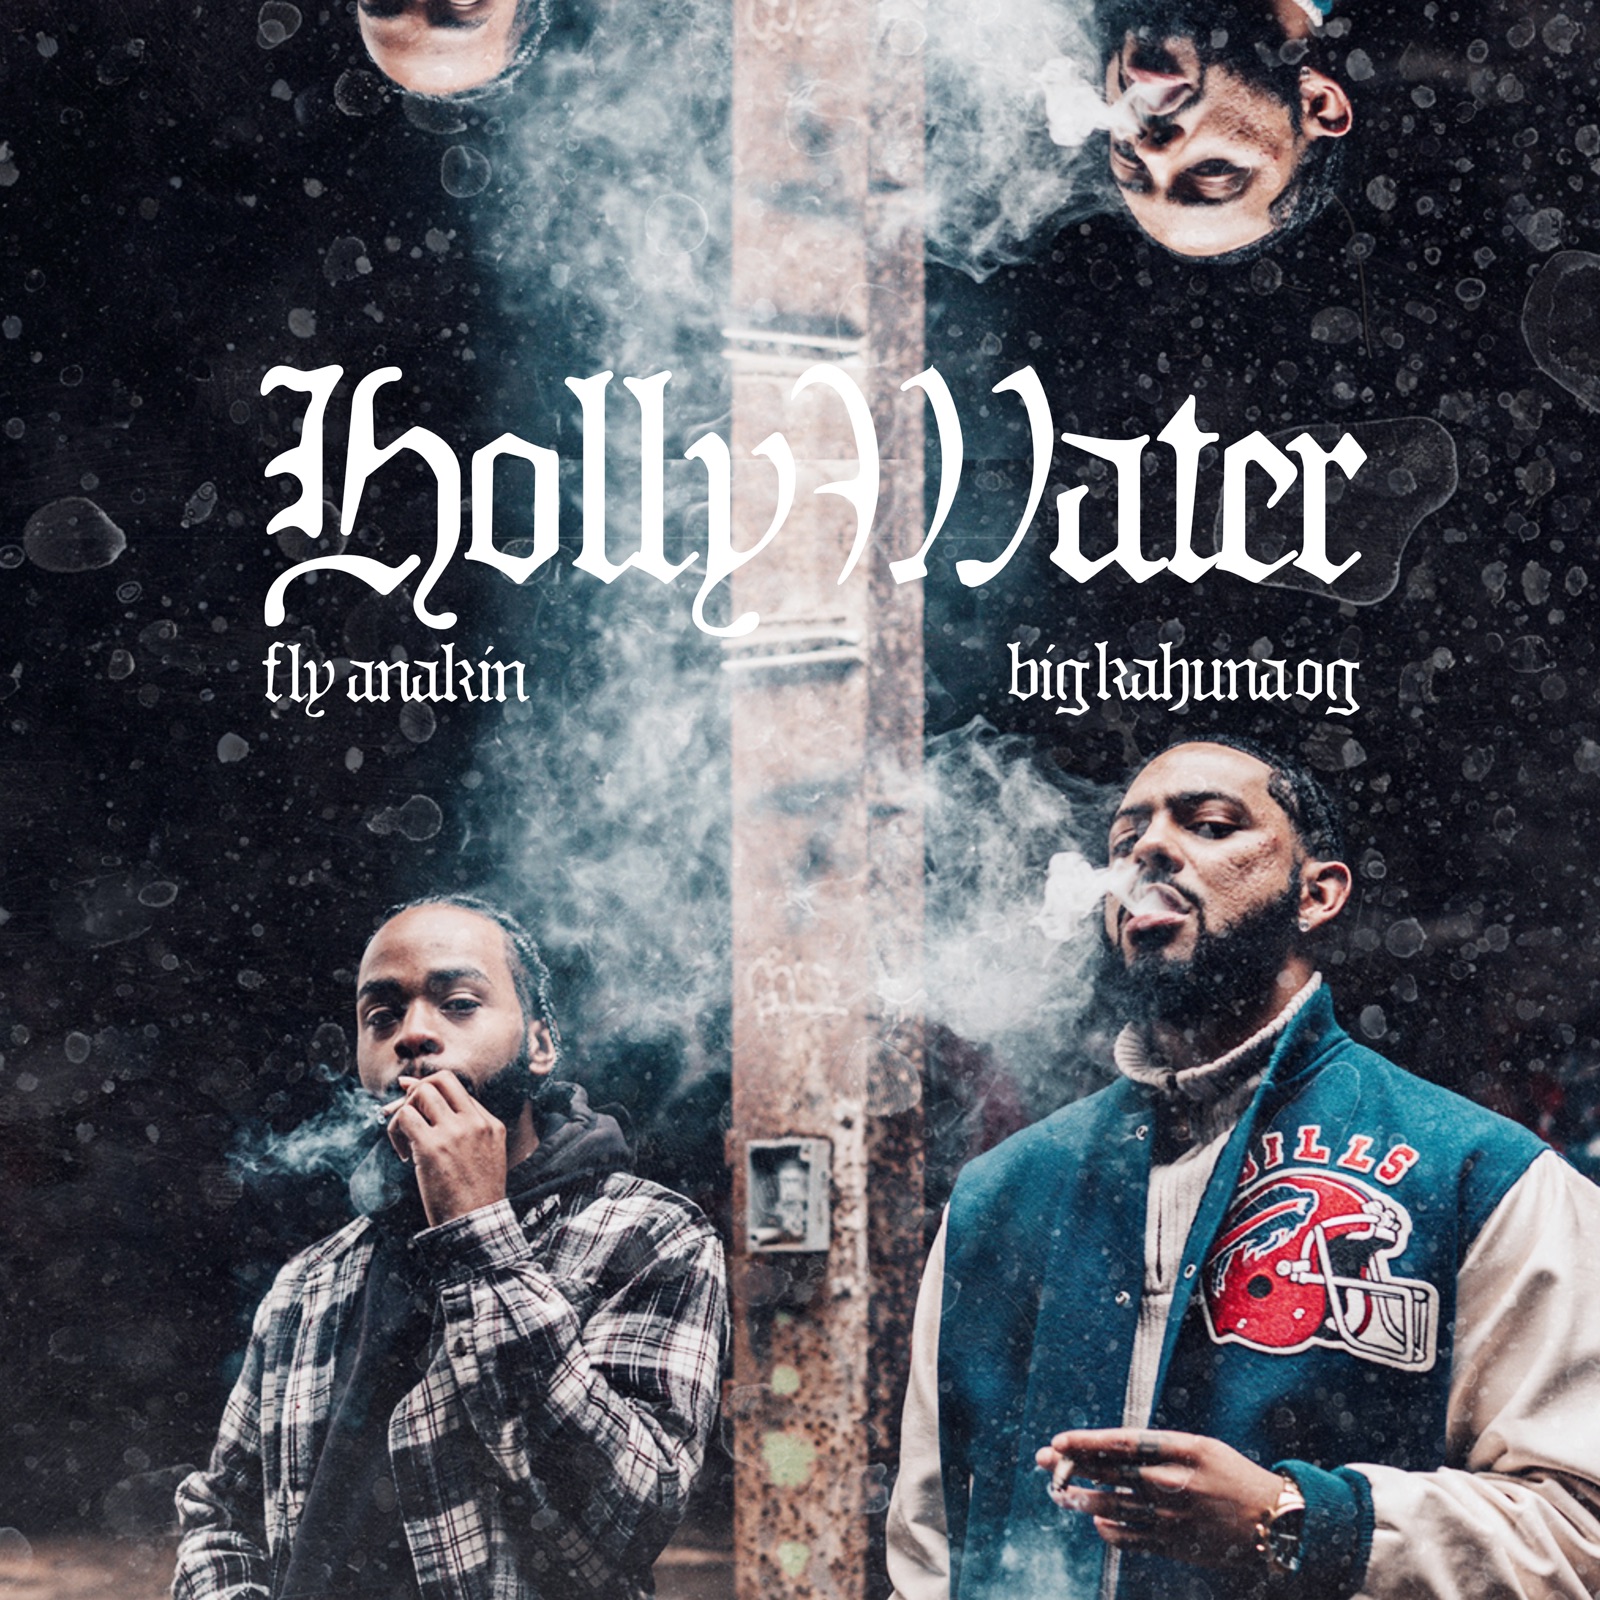 Holly Water